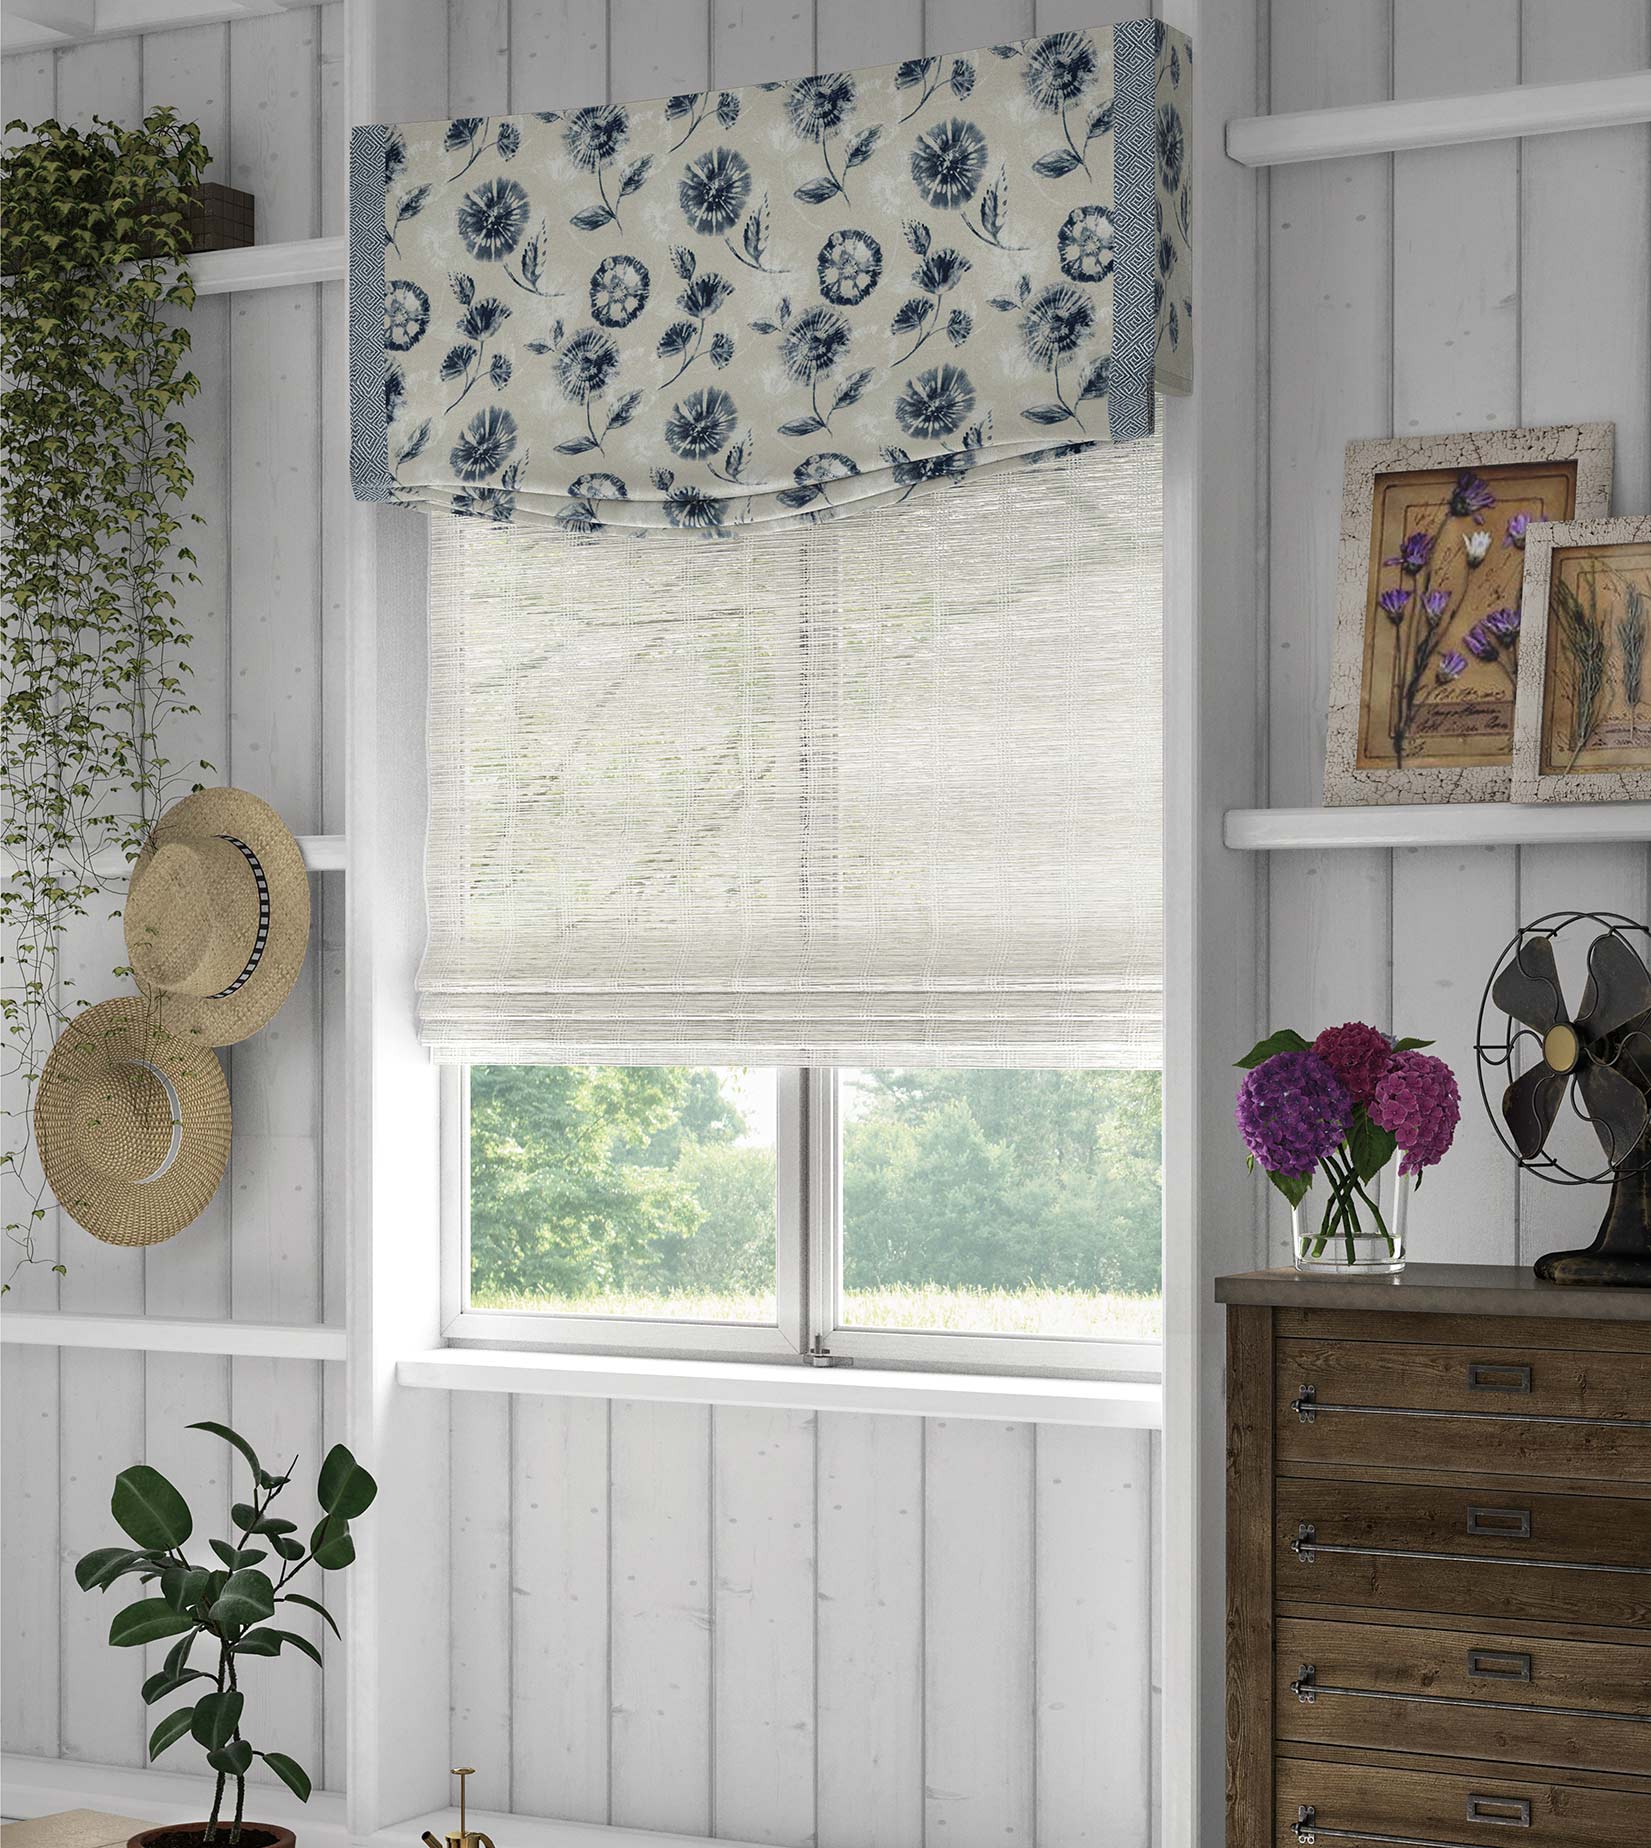 A custom fabric valance in a blue floral pattern hangs above a white woven wood fabric shade.